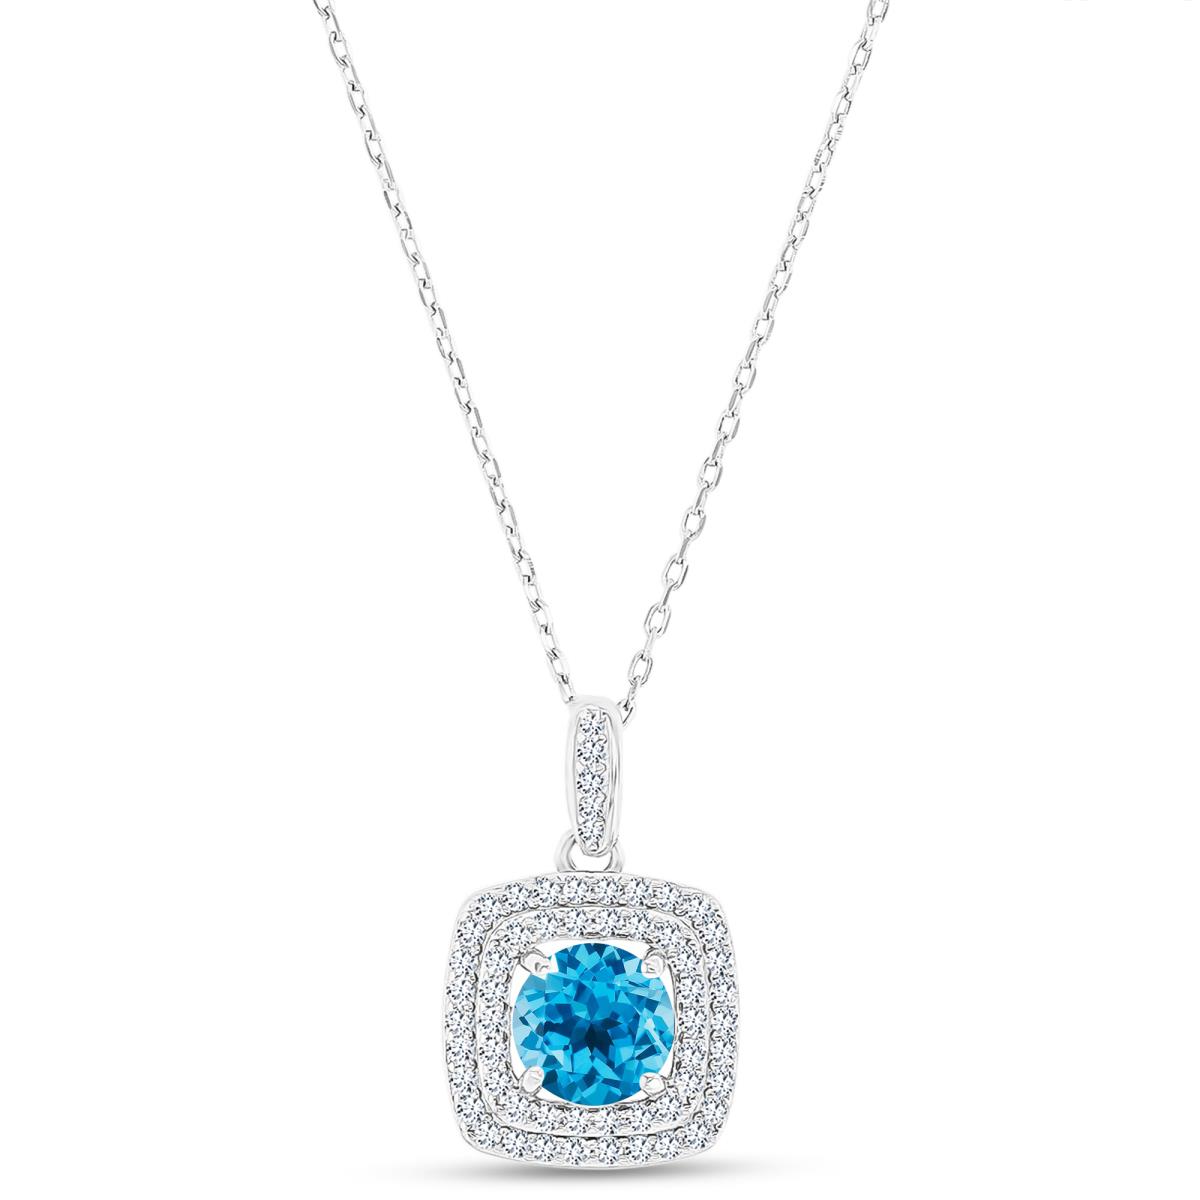 Sterling Silver Rhodium 7mm RD Blue Topaz/ Cr White Sapphire Cushion Double Halo 16"+2" Necklace